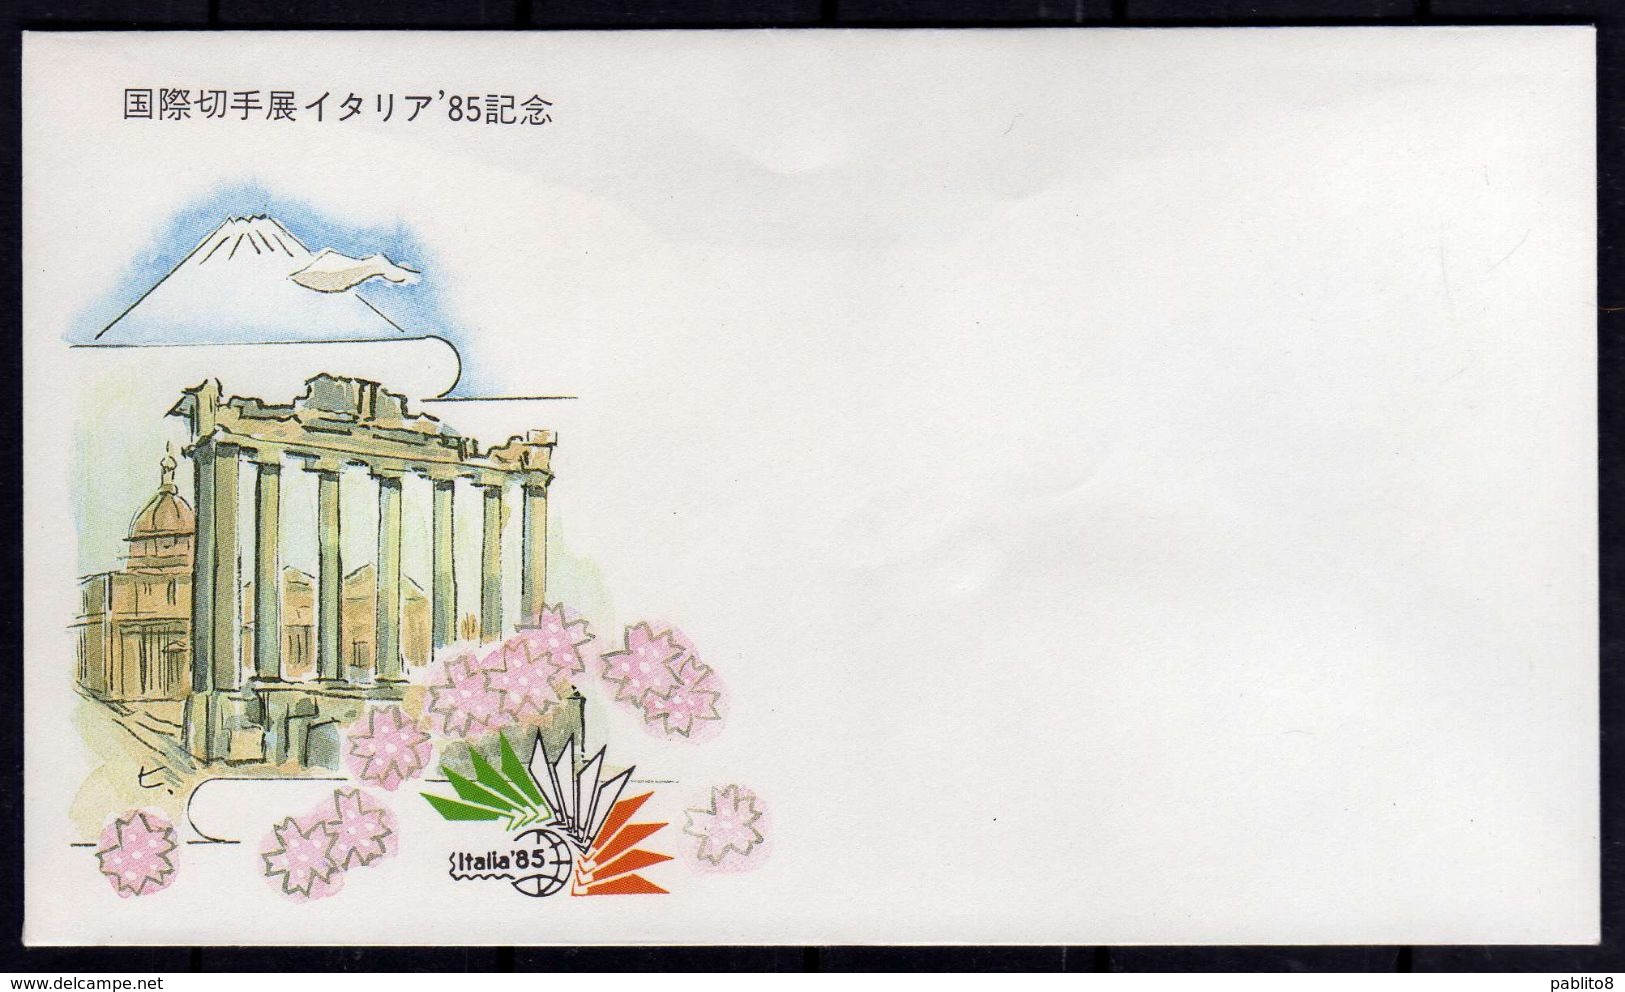 JAPAN NIPPON GIAPPONE JAPON 1985 ITALIA 85 PHILATELIC EXHIBITION STAMP ESPOSITION POSTAL ENTIRE COVER UNUSED - Buste